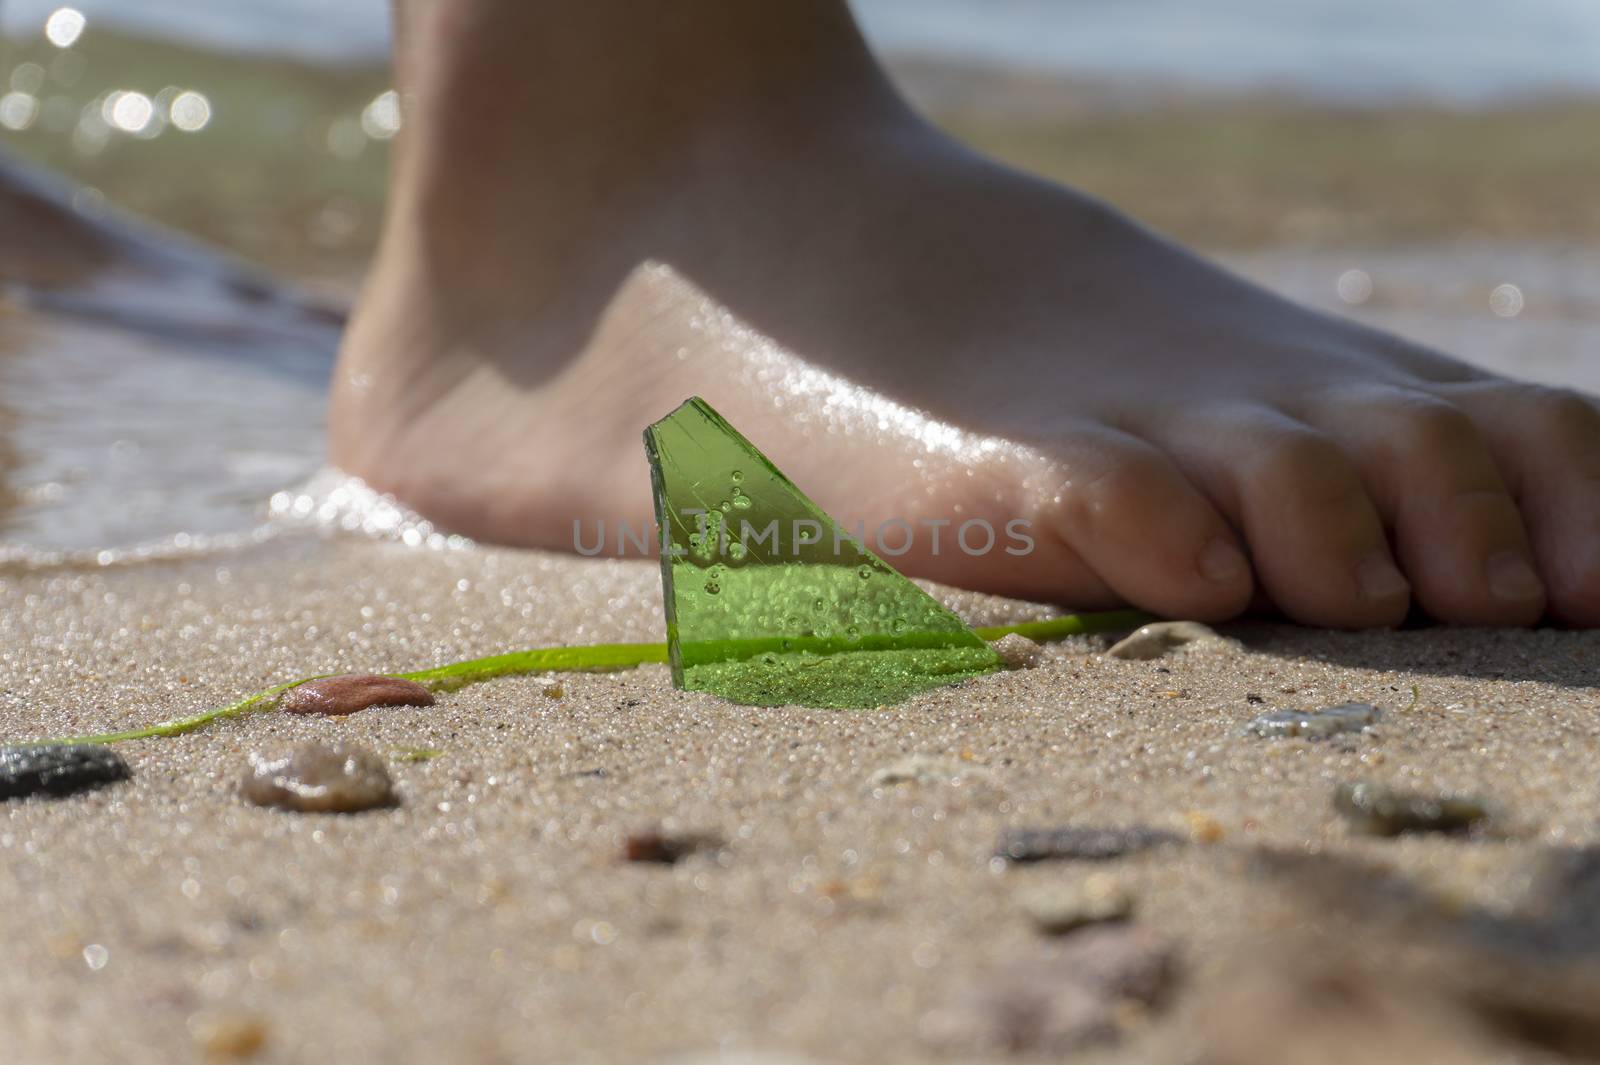 Danger of broken glass on a beach with a close up view of a shard of green glass protruding from the sand alongside the bare foot of a young person